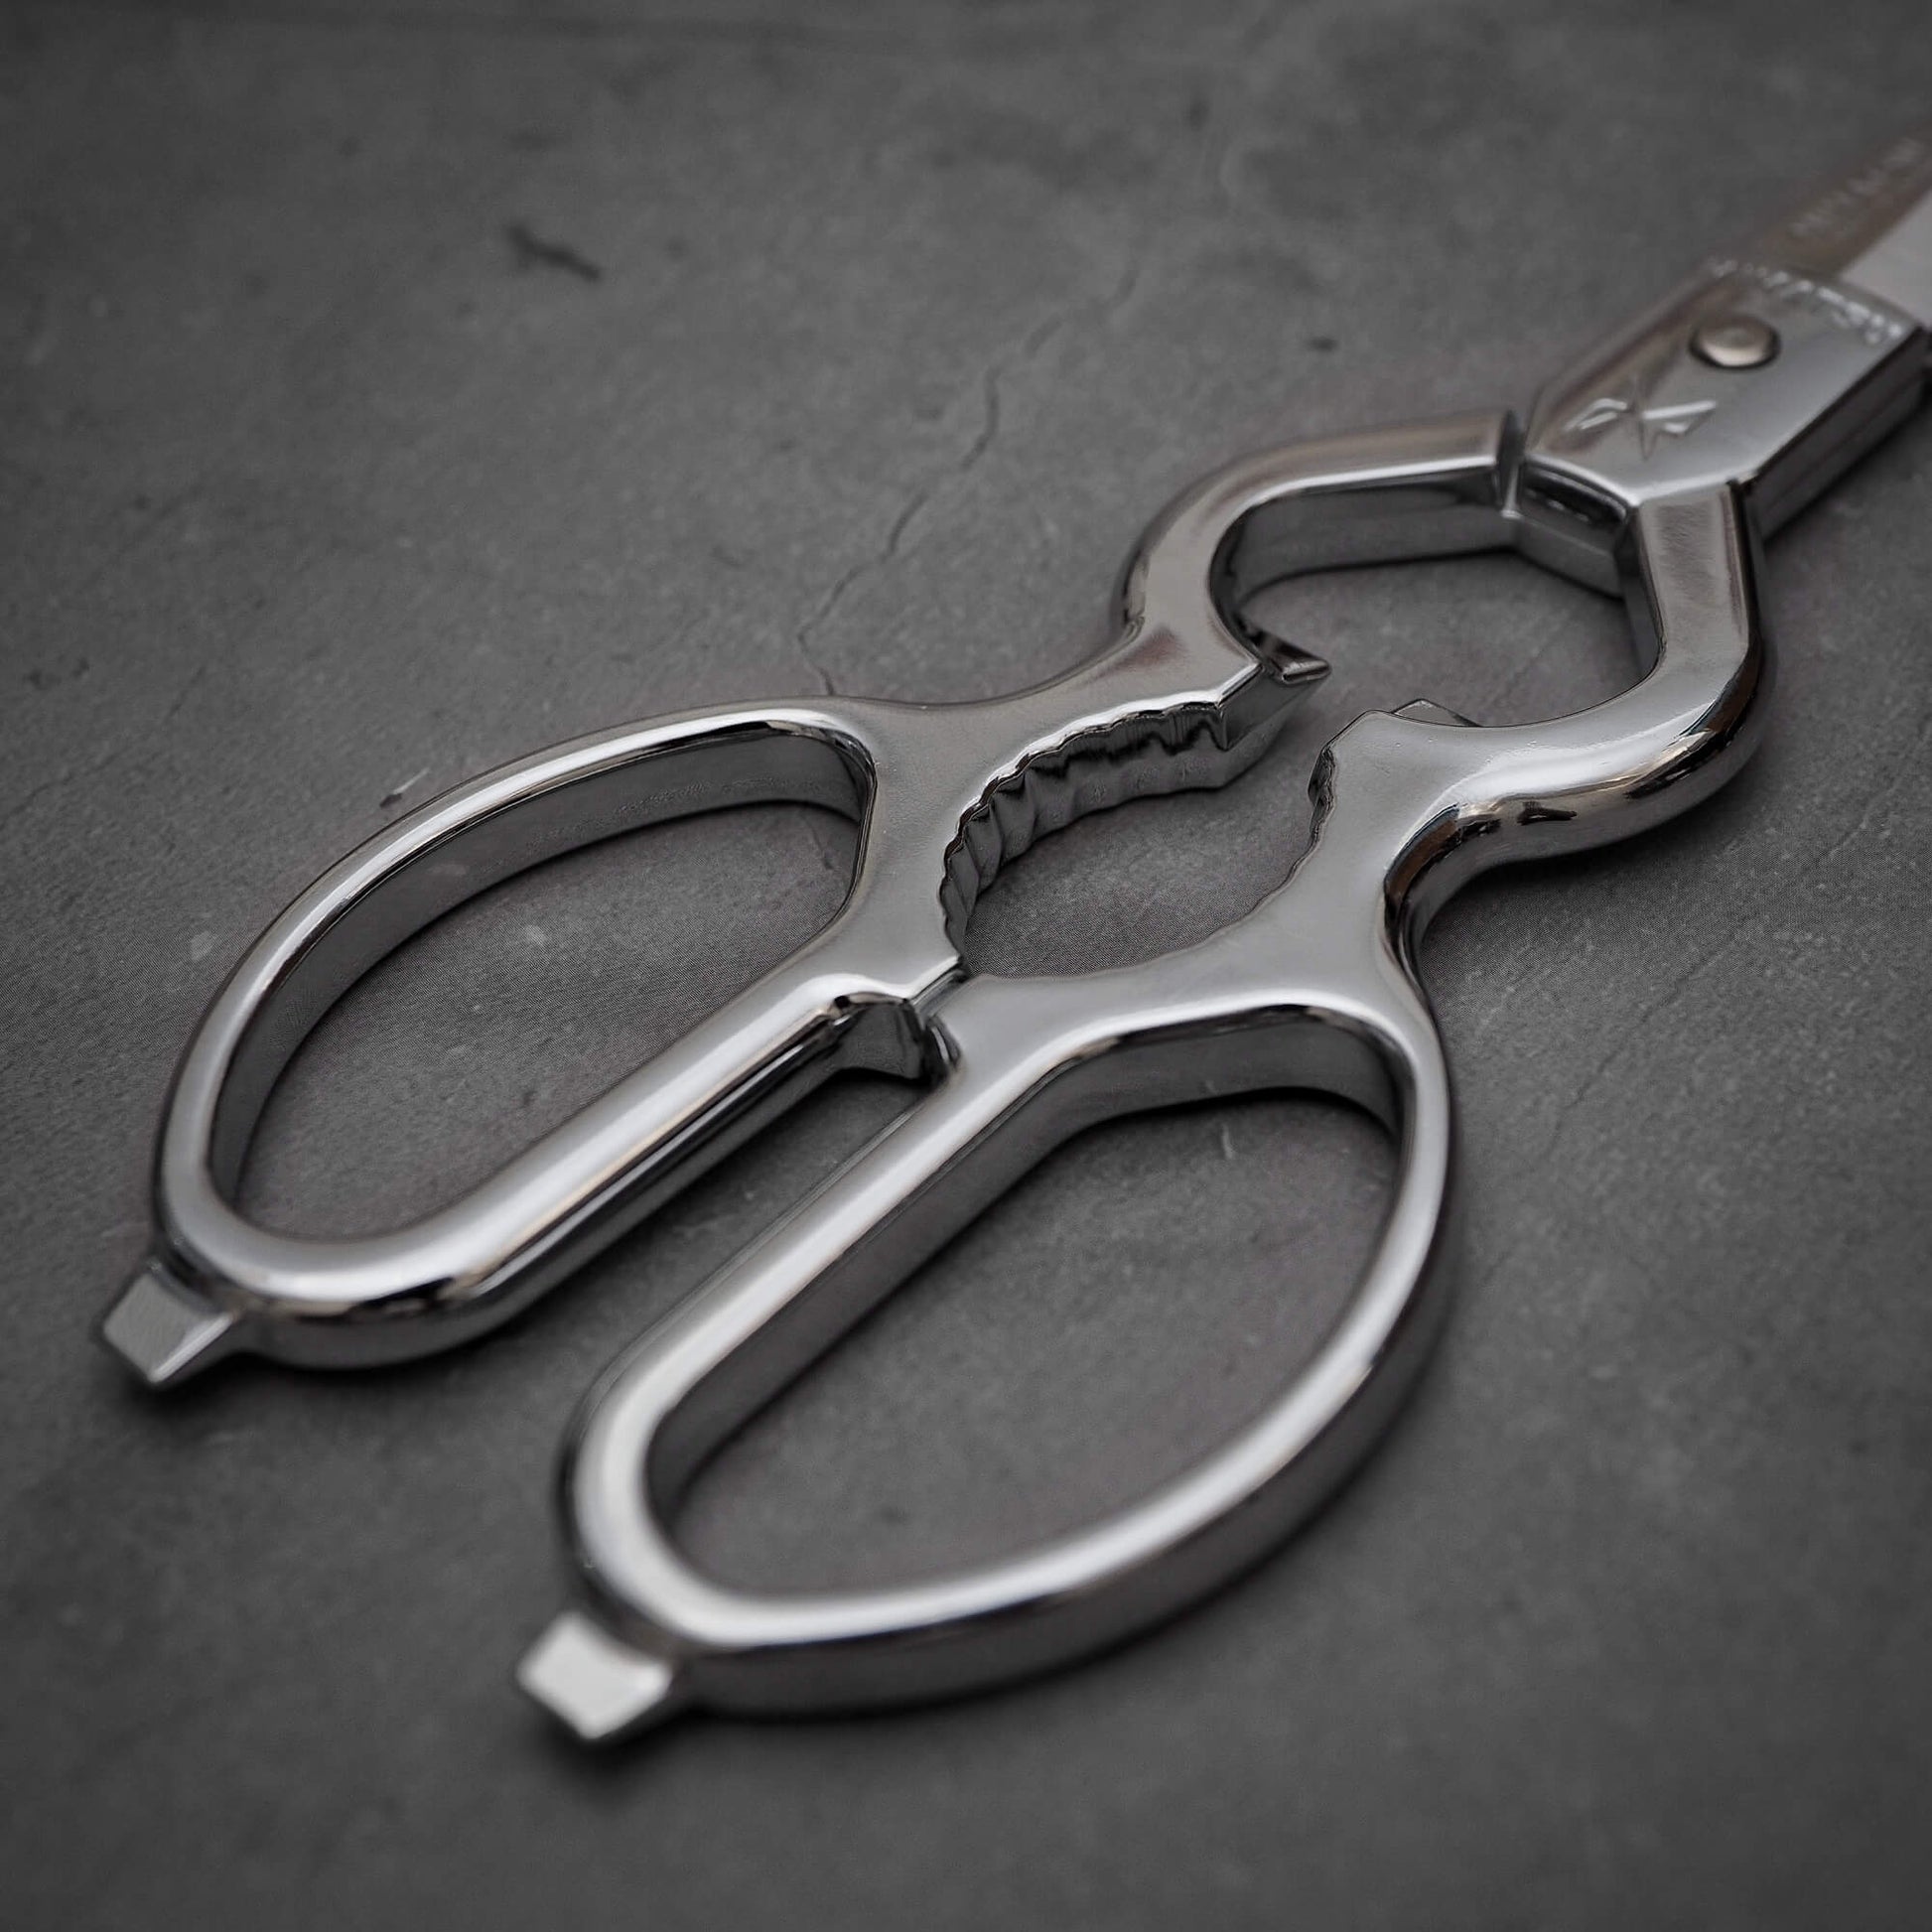 Close up view of the handle of Mimatsu 200mm kitchen shears: Japan-made all-stainless, durable shears for a variety of kitchen tasks. 